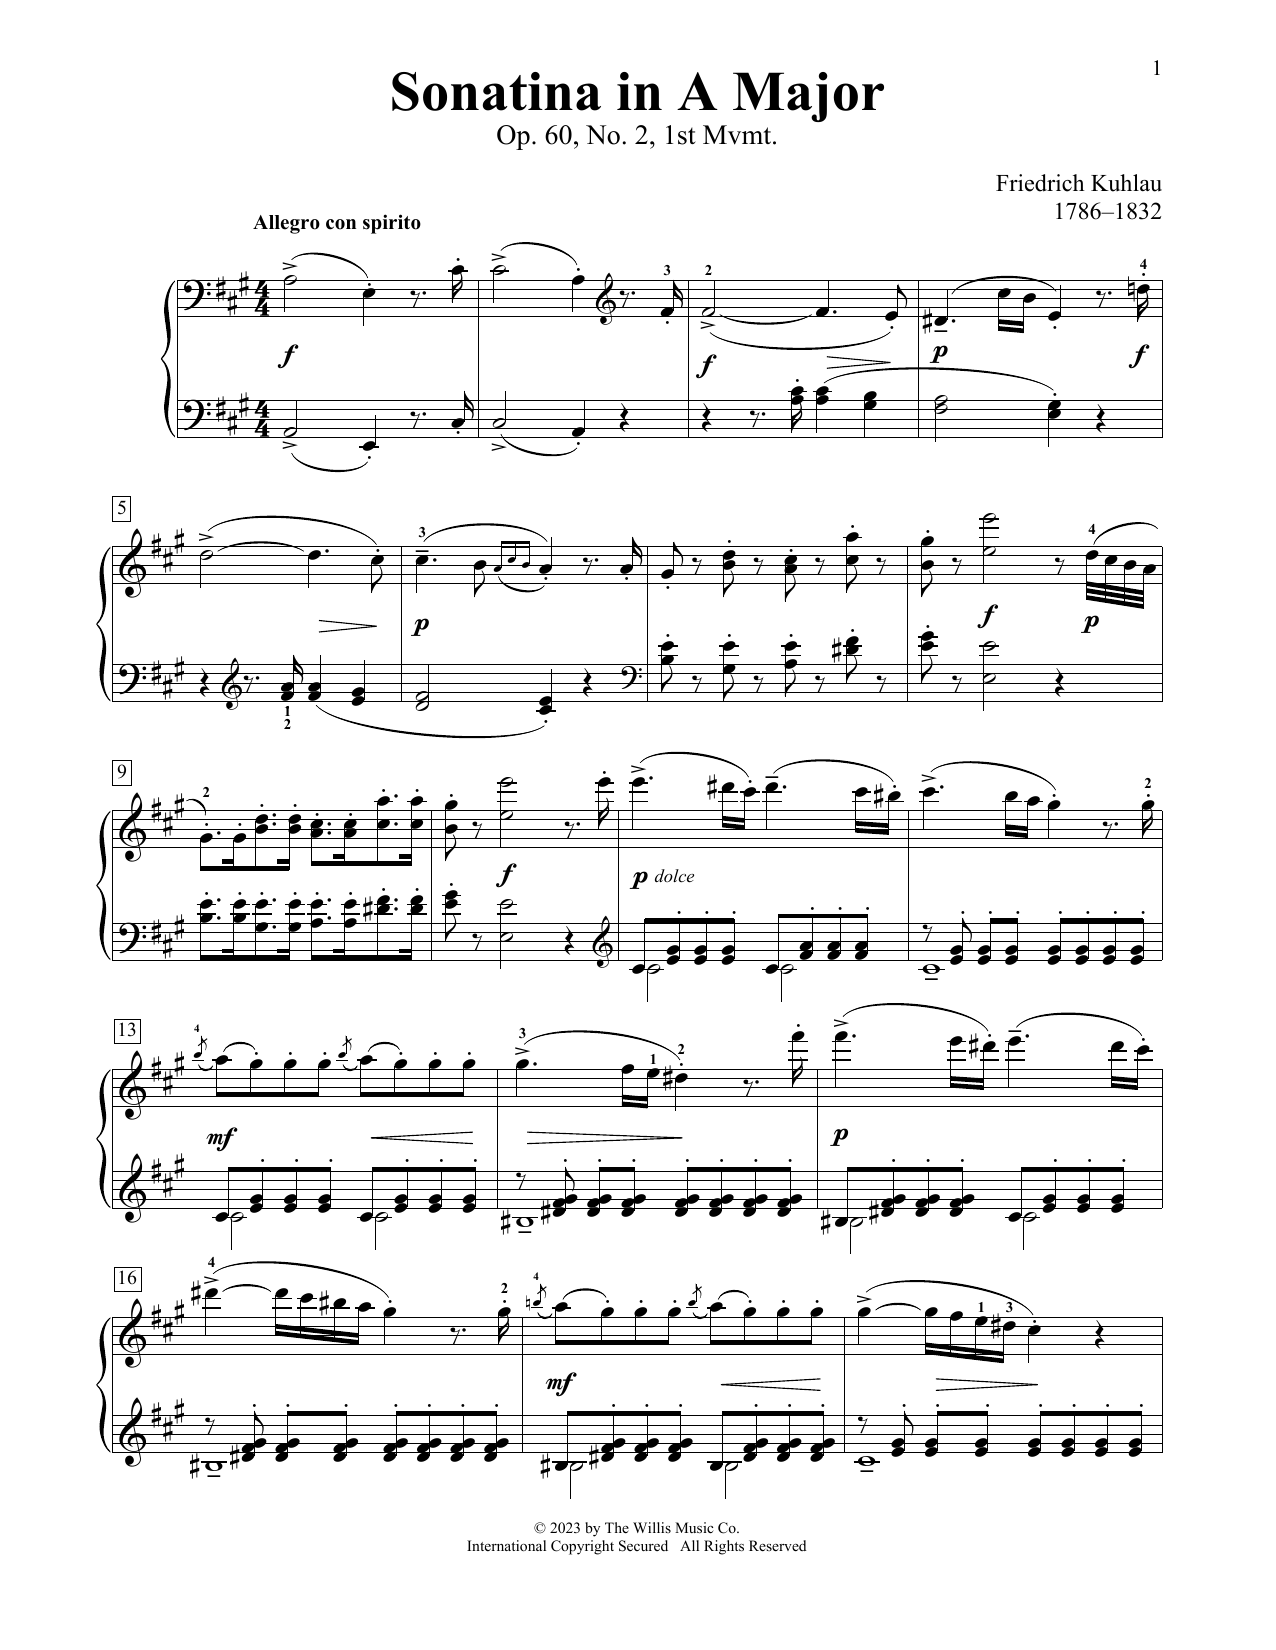 Frederic Kuhlau Sonatina In A Major, Op. 60, No. 2, 1st Mvmt sheet music notes printable PDF score